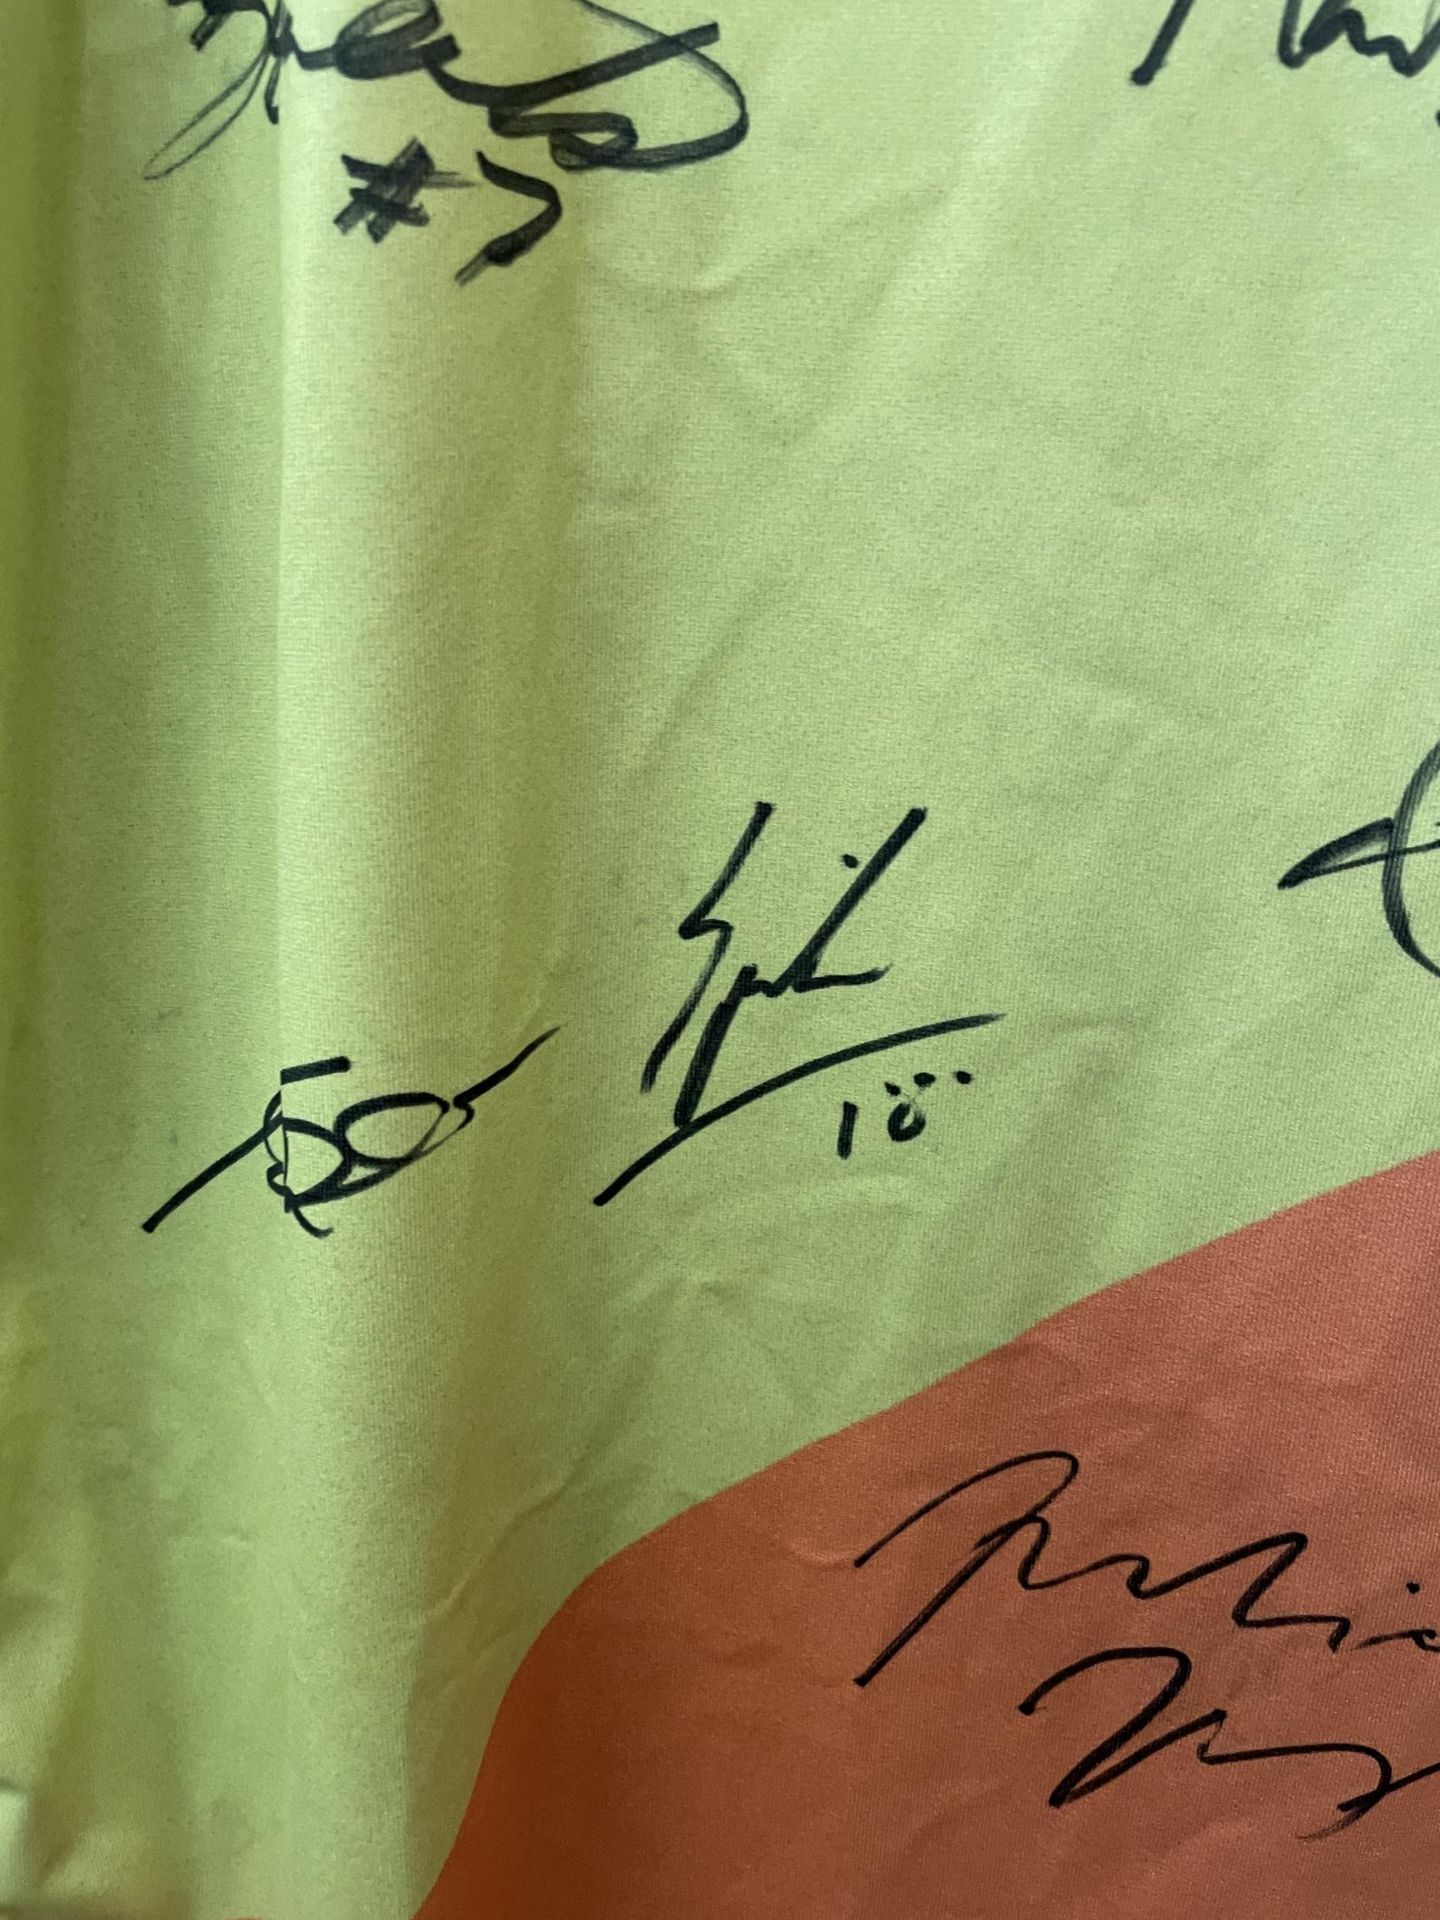 A FIFA WORLD CUP 2006 GERMANY SIGNED FLAG - Image 5 of 8